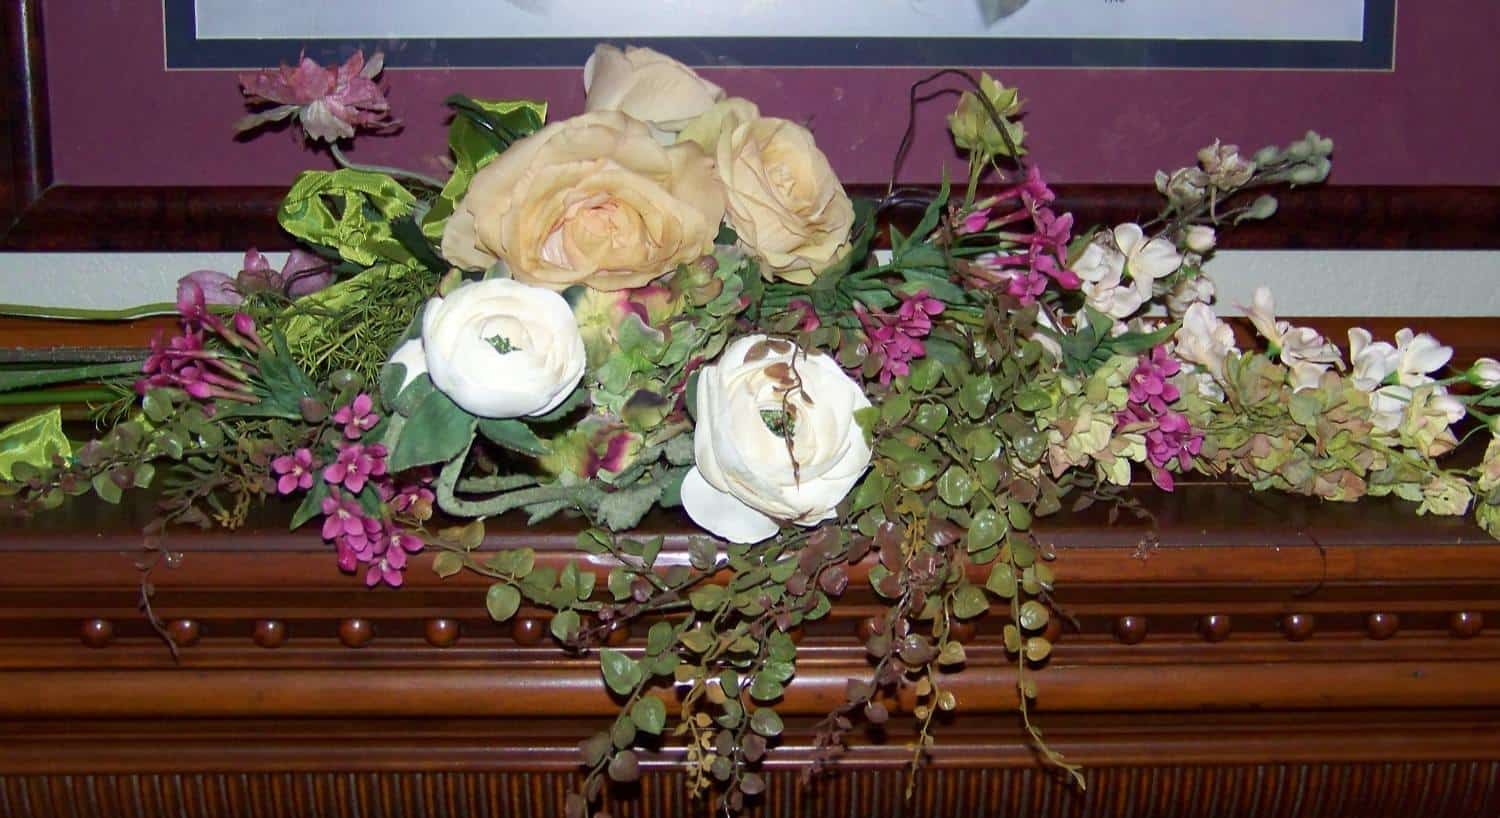 Close up view of white and cream roses, pink and purple flowers, and greenery on top of wooden mantel